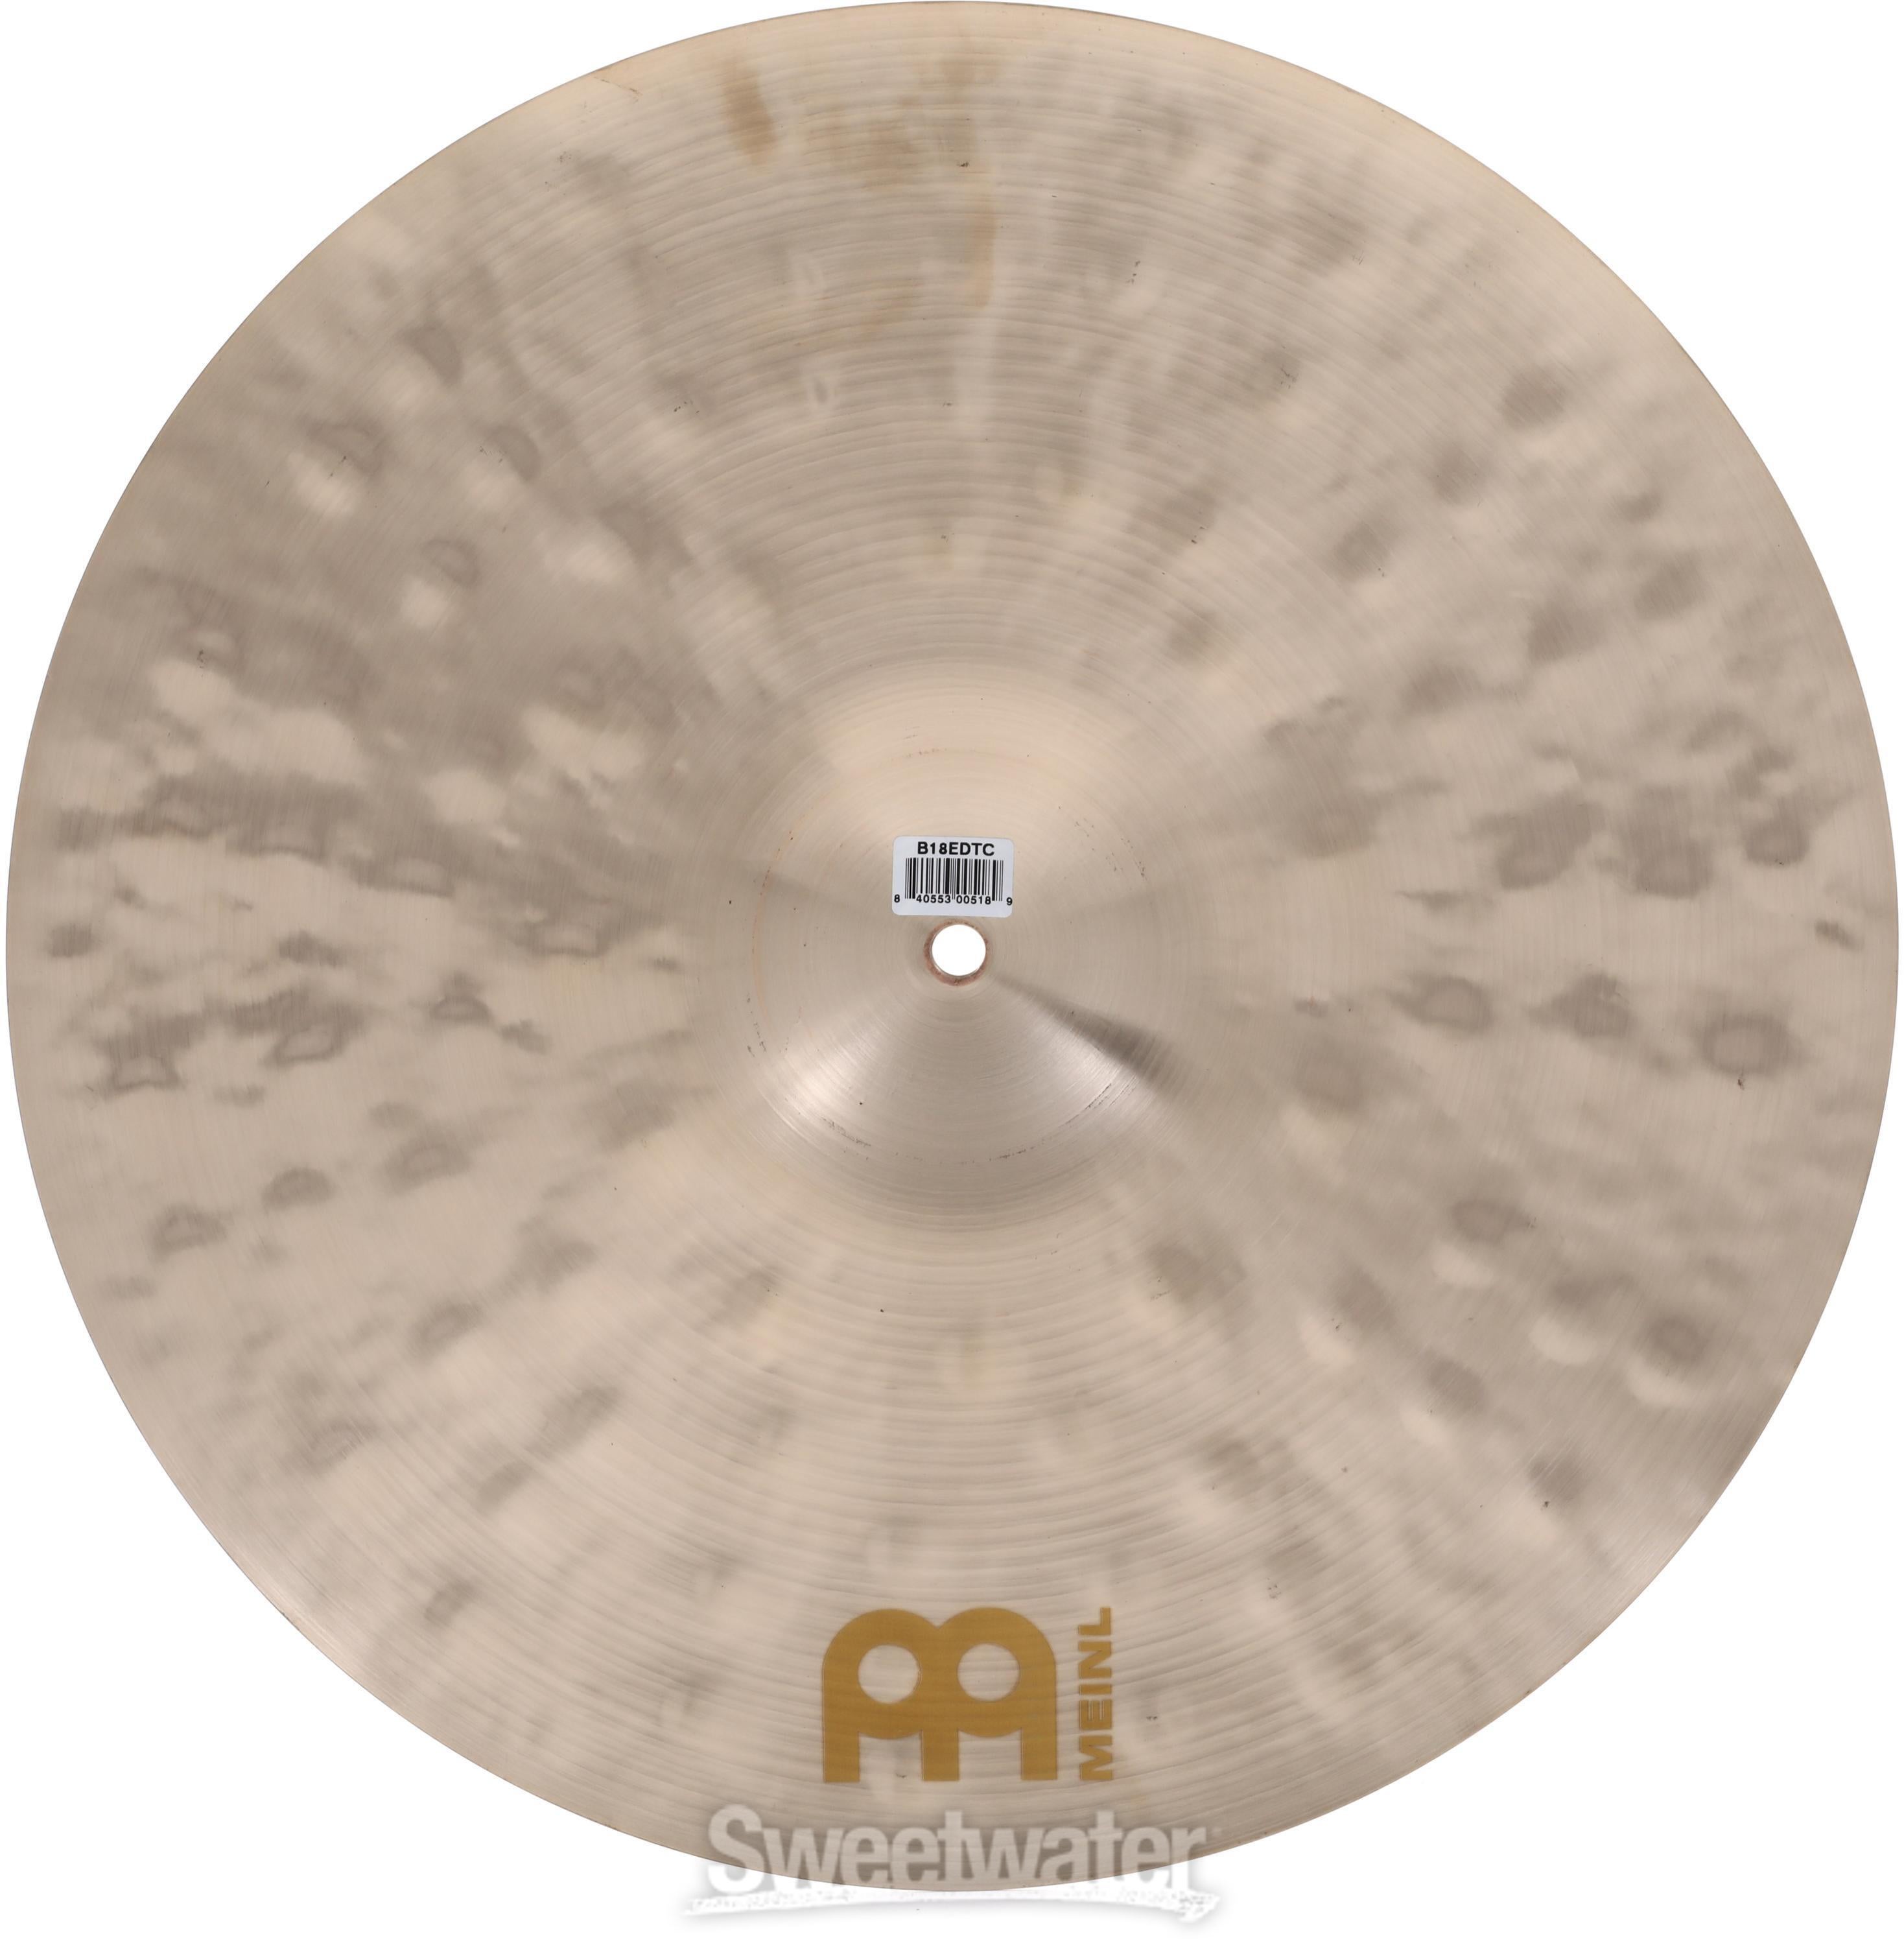 Meinl Cymbals 18 inch Byzance Extra Dry Thin Crash Cymbal | Sweetwater